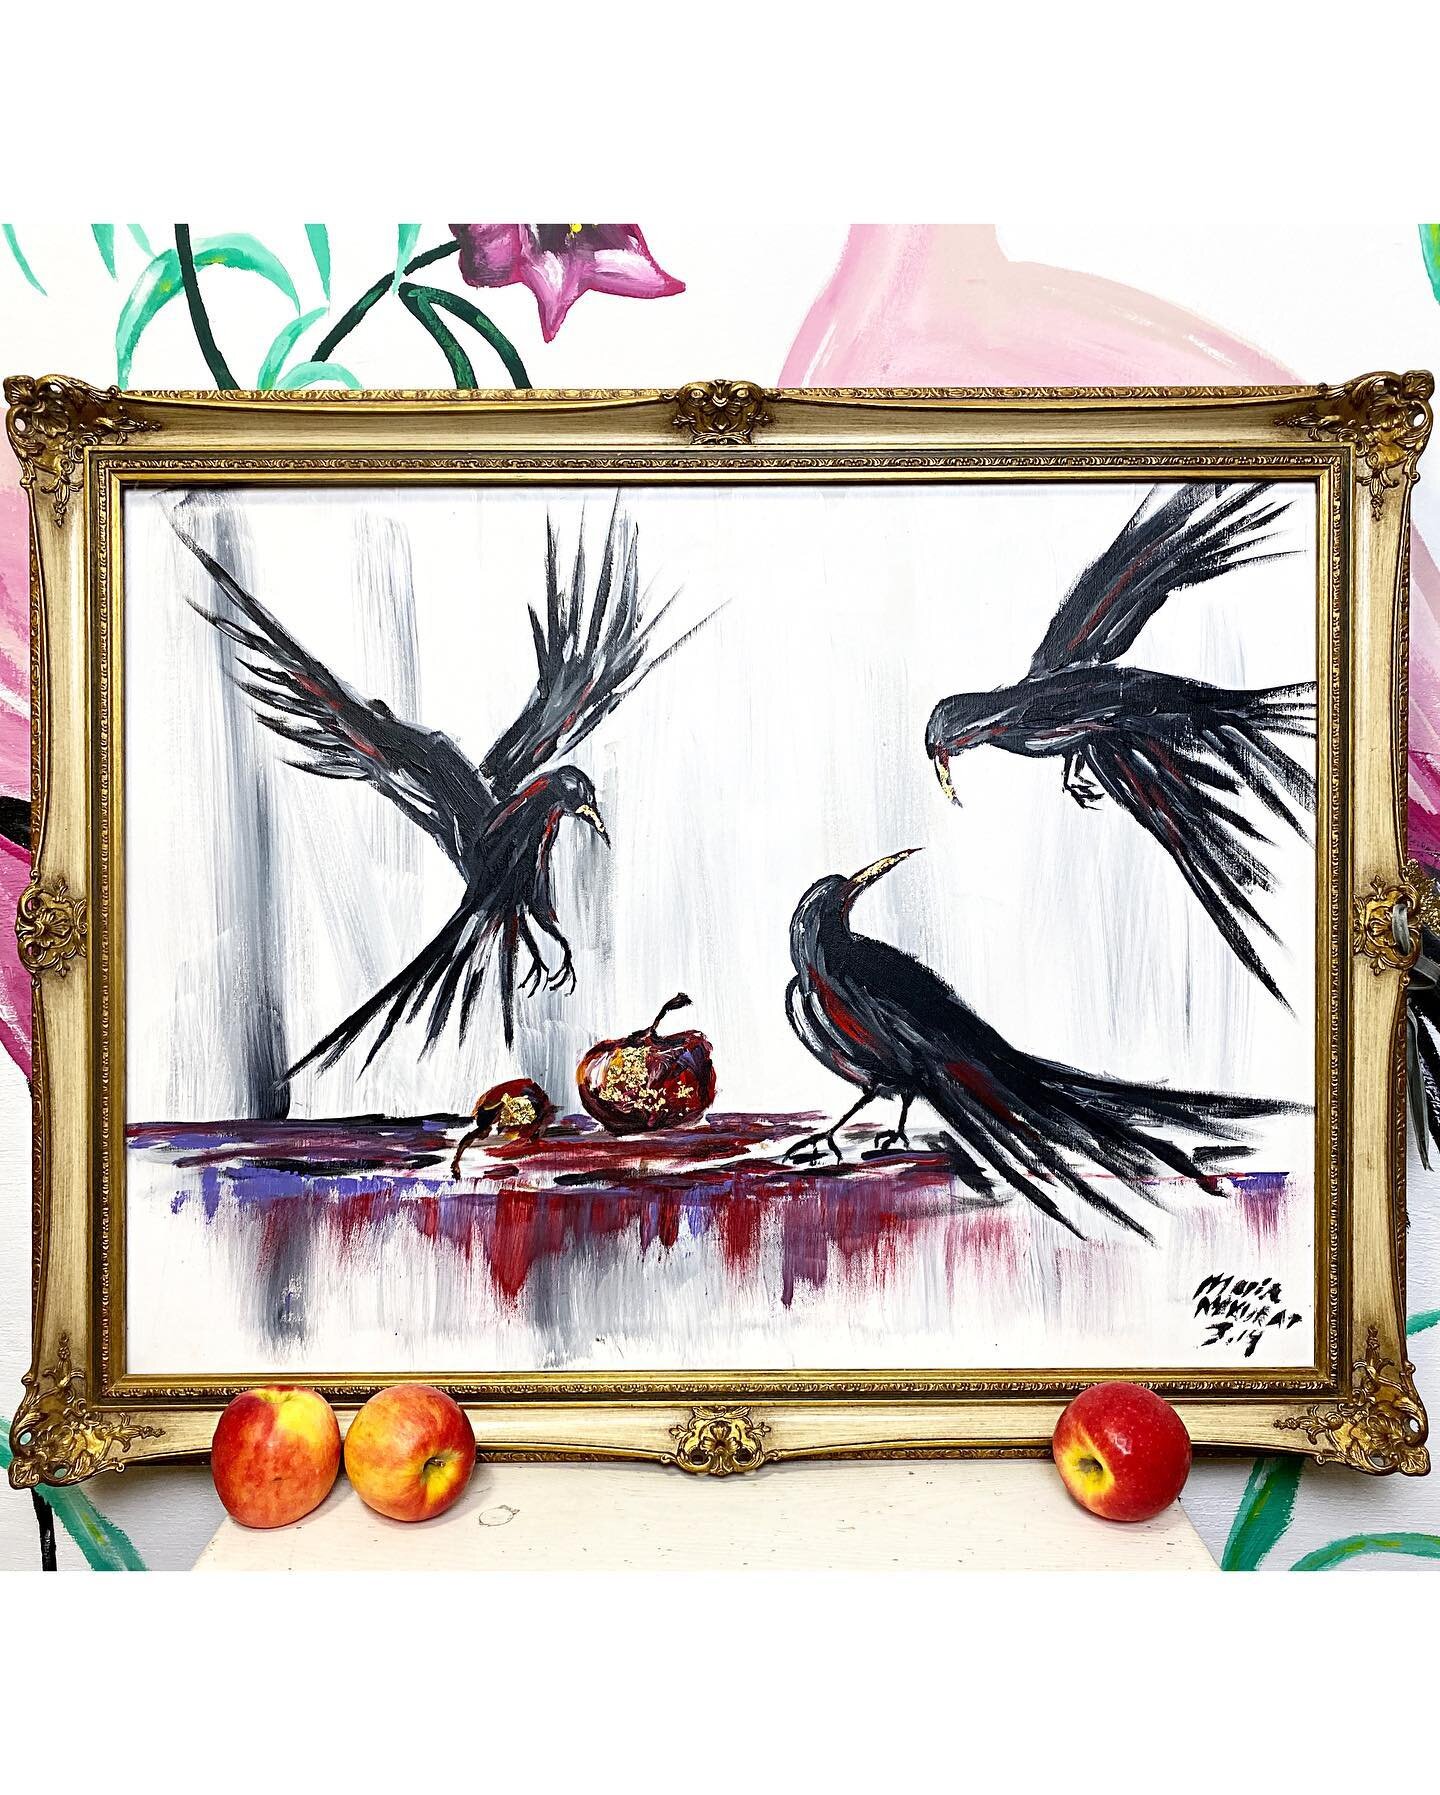 &ldquo;The crows and the apple&rdquo; 🖤✨🍎 Let me know what you think! Apple crow painting gold Maria Makurat